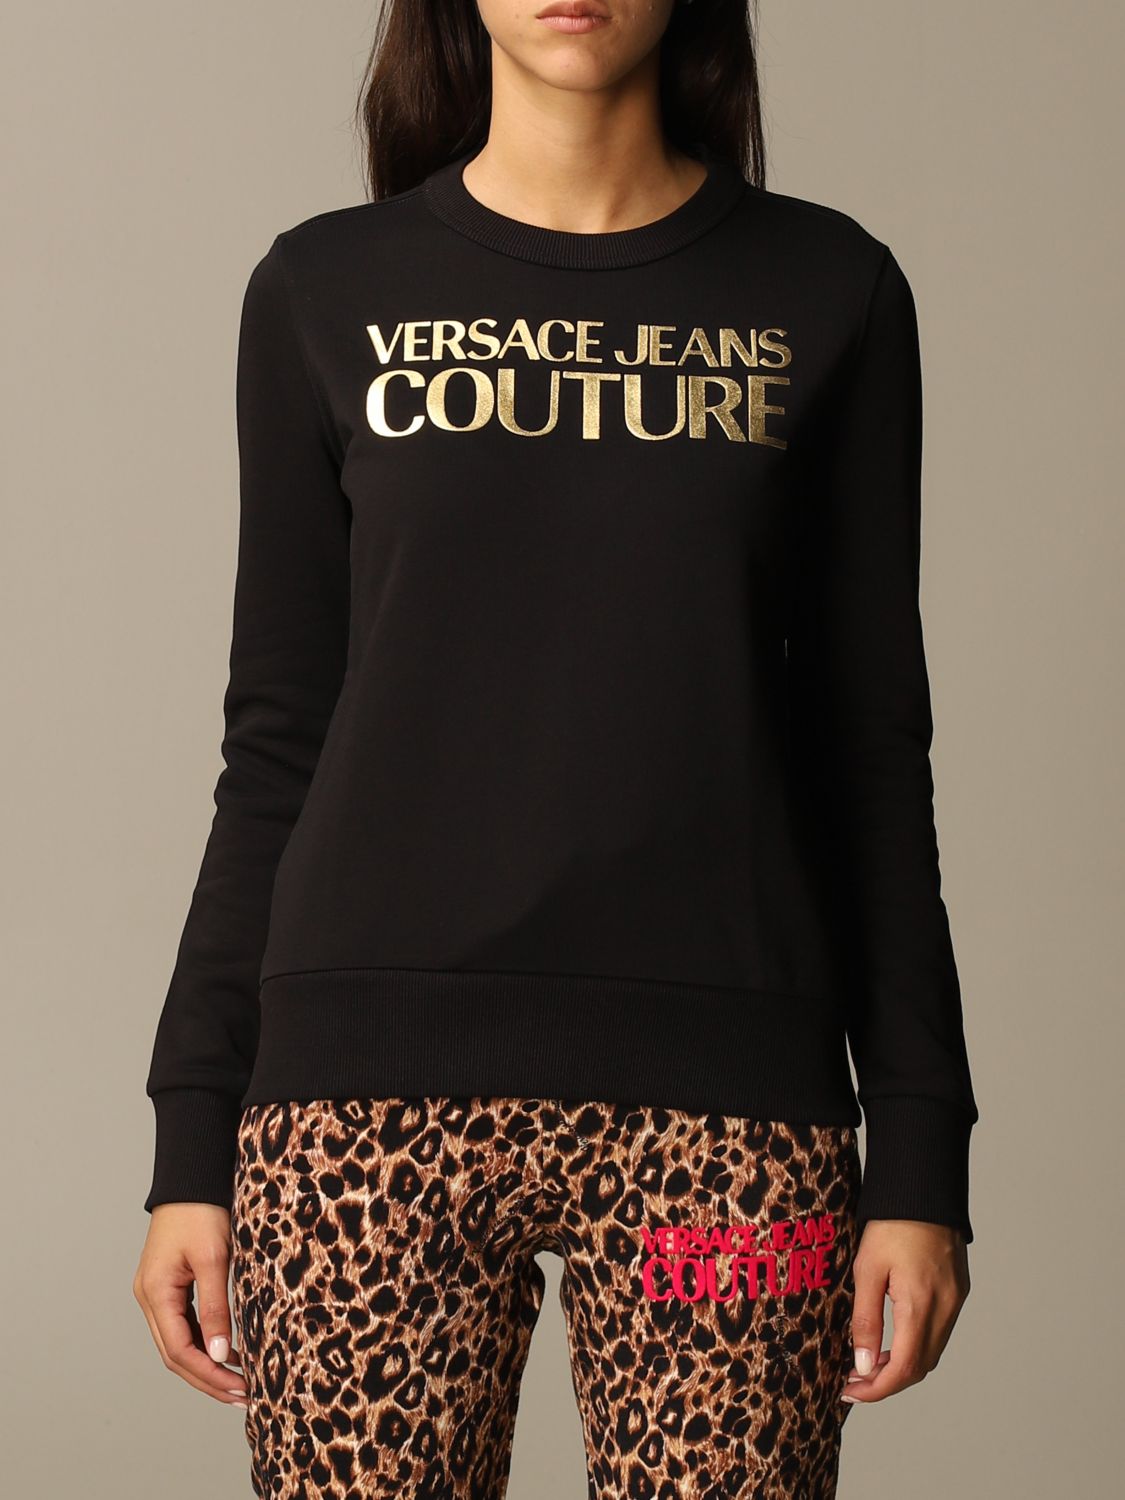 versace jeans couture womens